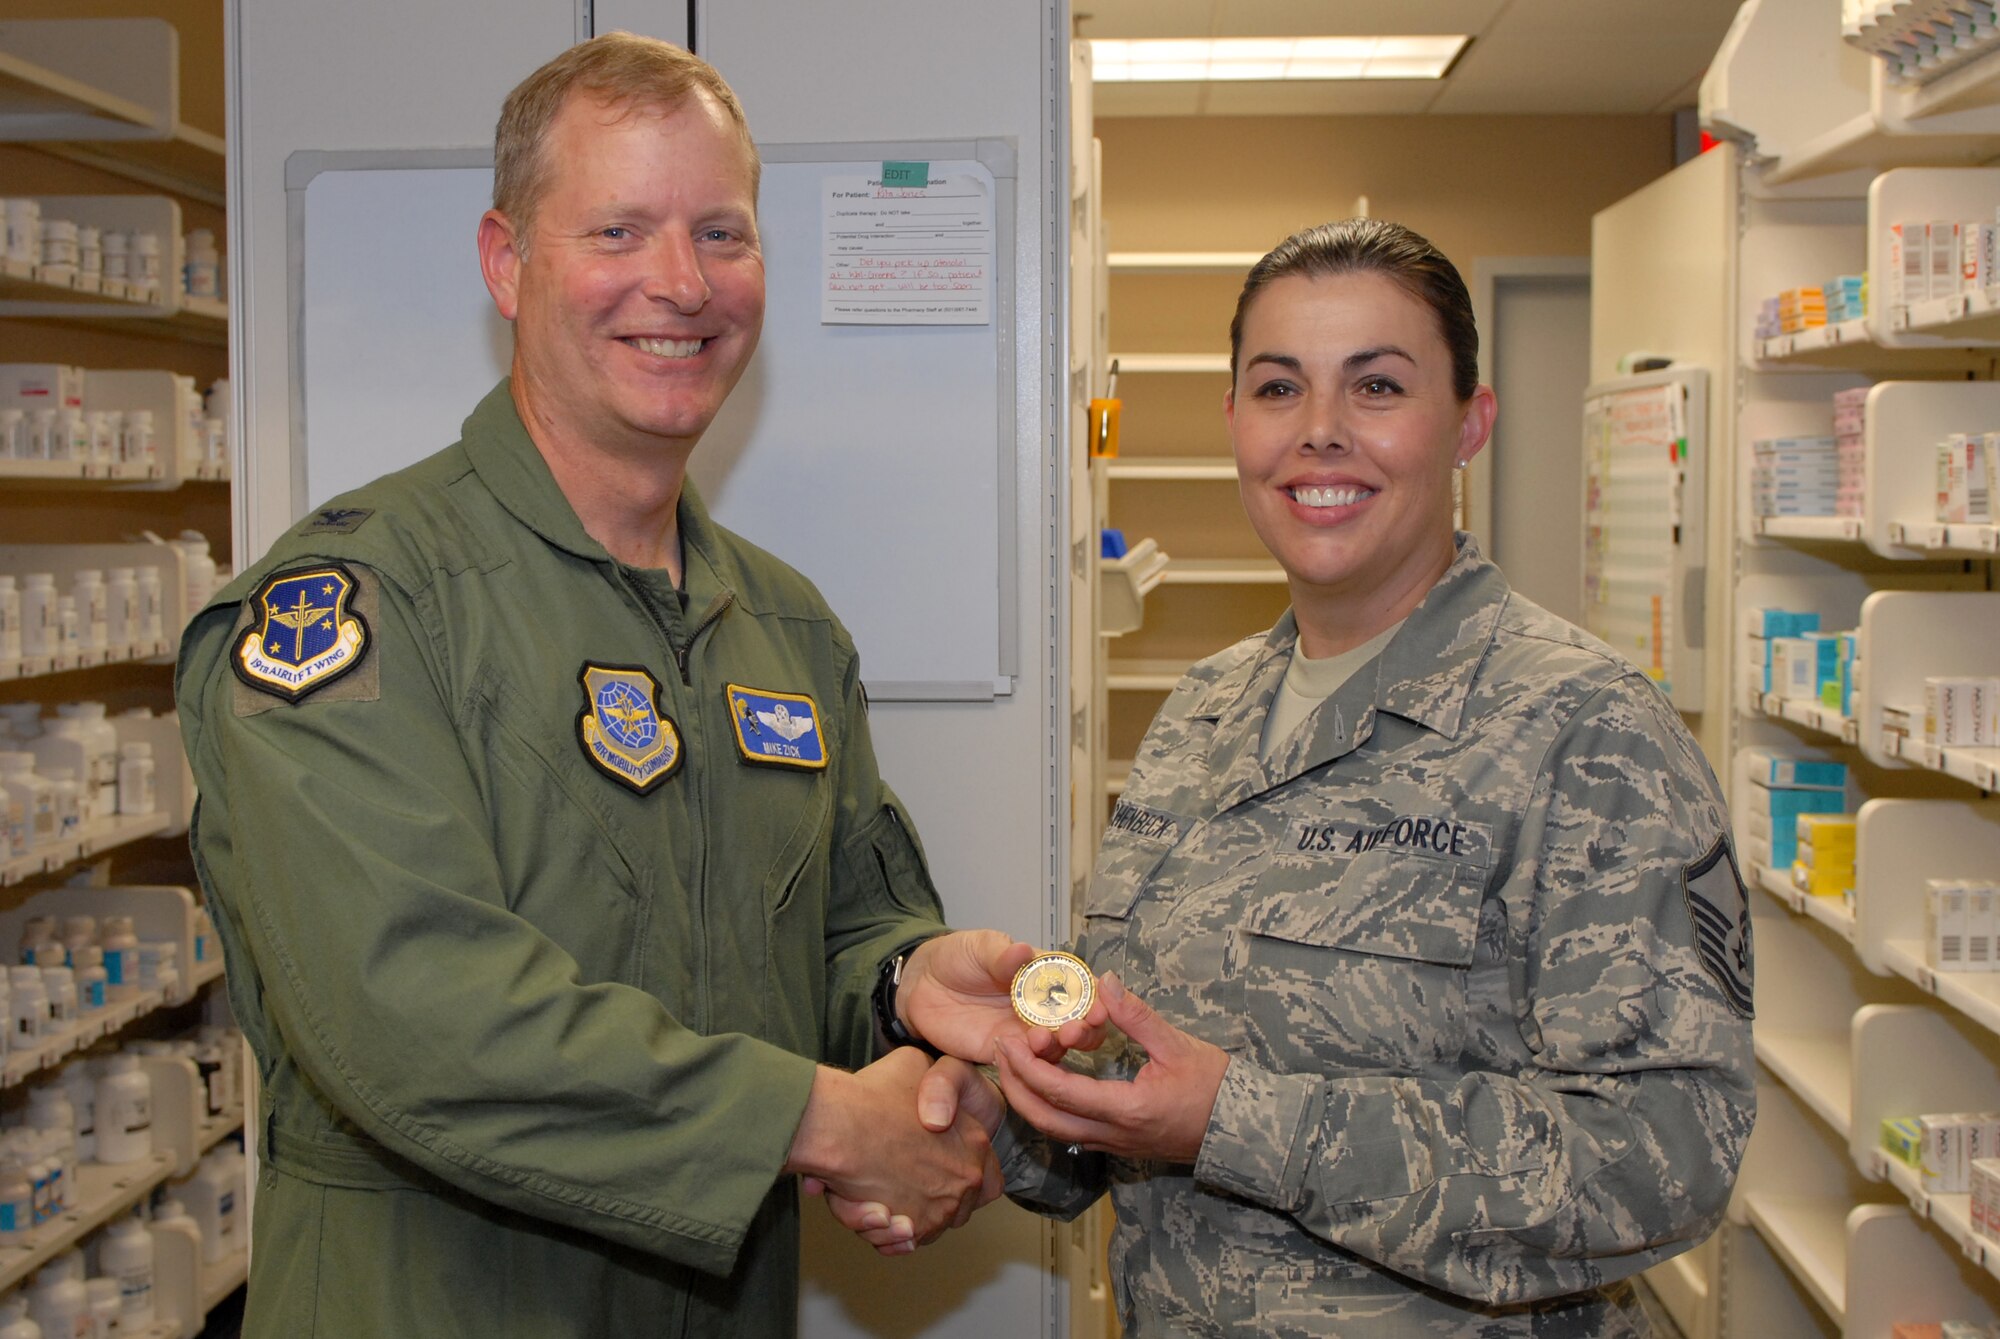 Col. Michael Zick, 19th Airlift Wing vice commander, presents Master Sgt. Amber Aschenbeck, 19th Medical Support Squadron pharmacy flight chief, with a Black Knights coin June 4 for being the Combat Airlifter of the Week at the pharmacy on base. Sergeant Aschenbeck managed a $285,000 project at the pharmacy, ensuring better customer service and timeliness with patients seen at the medical group. (U.S. Air Force photo by Senior Airman Steele C. G. Britton)